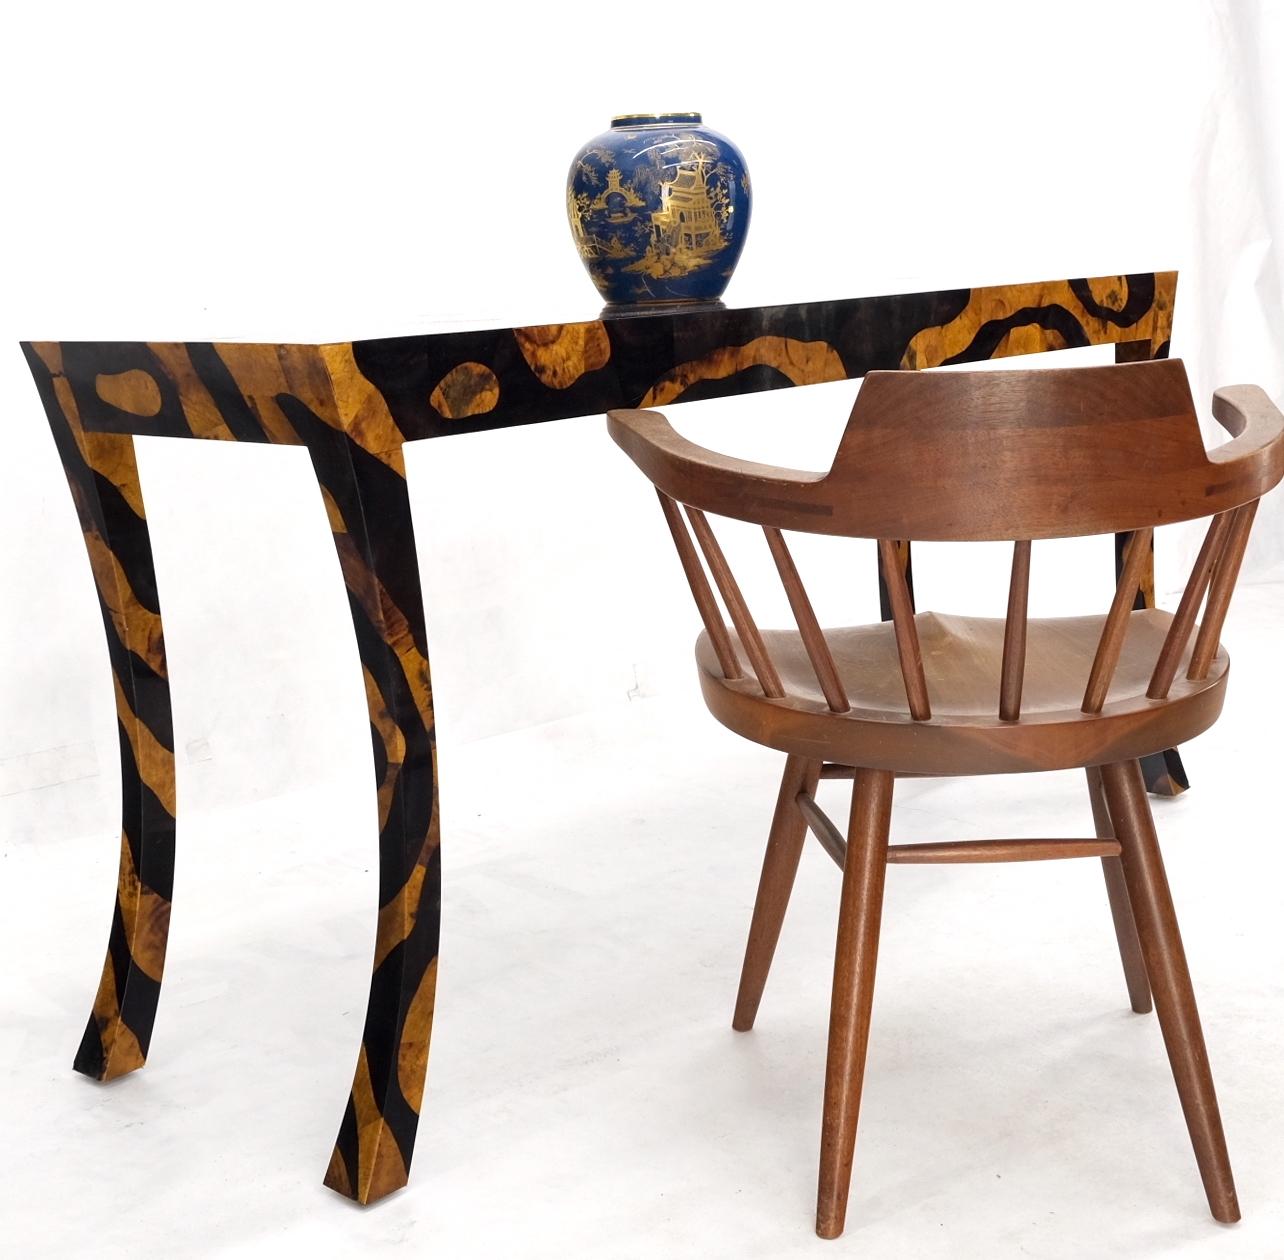 Modern Tiger pattern tessellated stone Cabriole legs console sofa table mint.